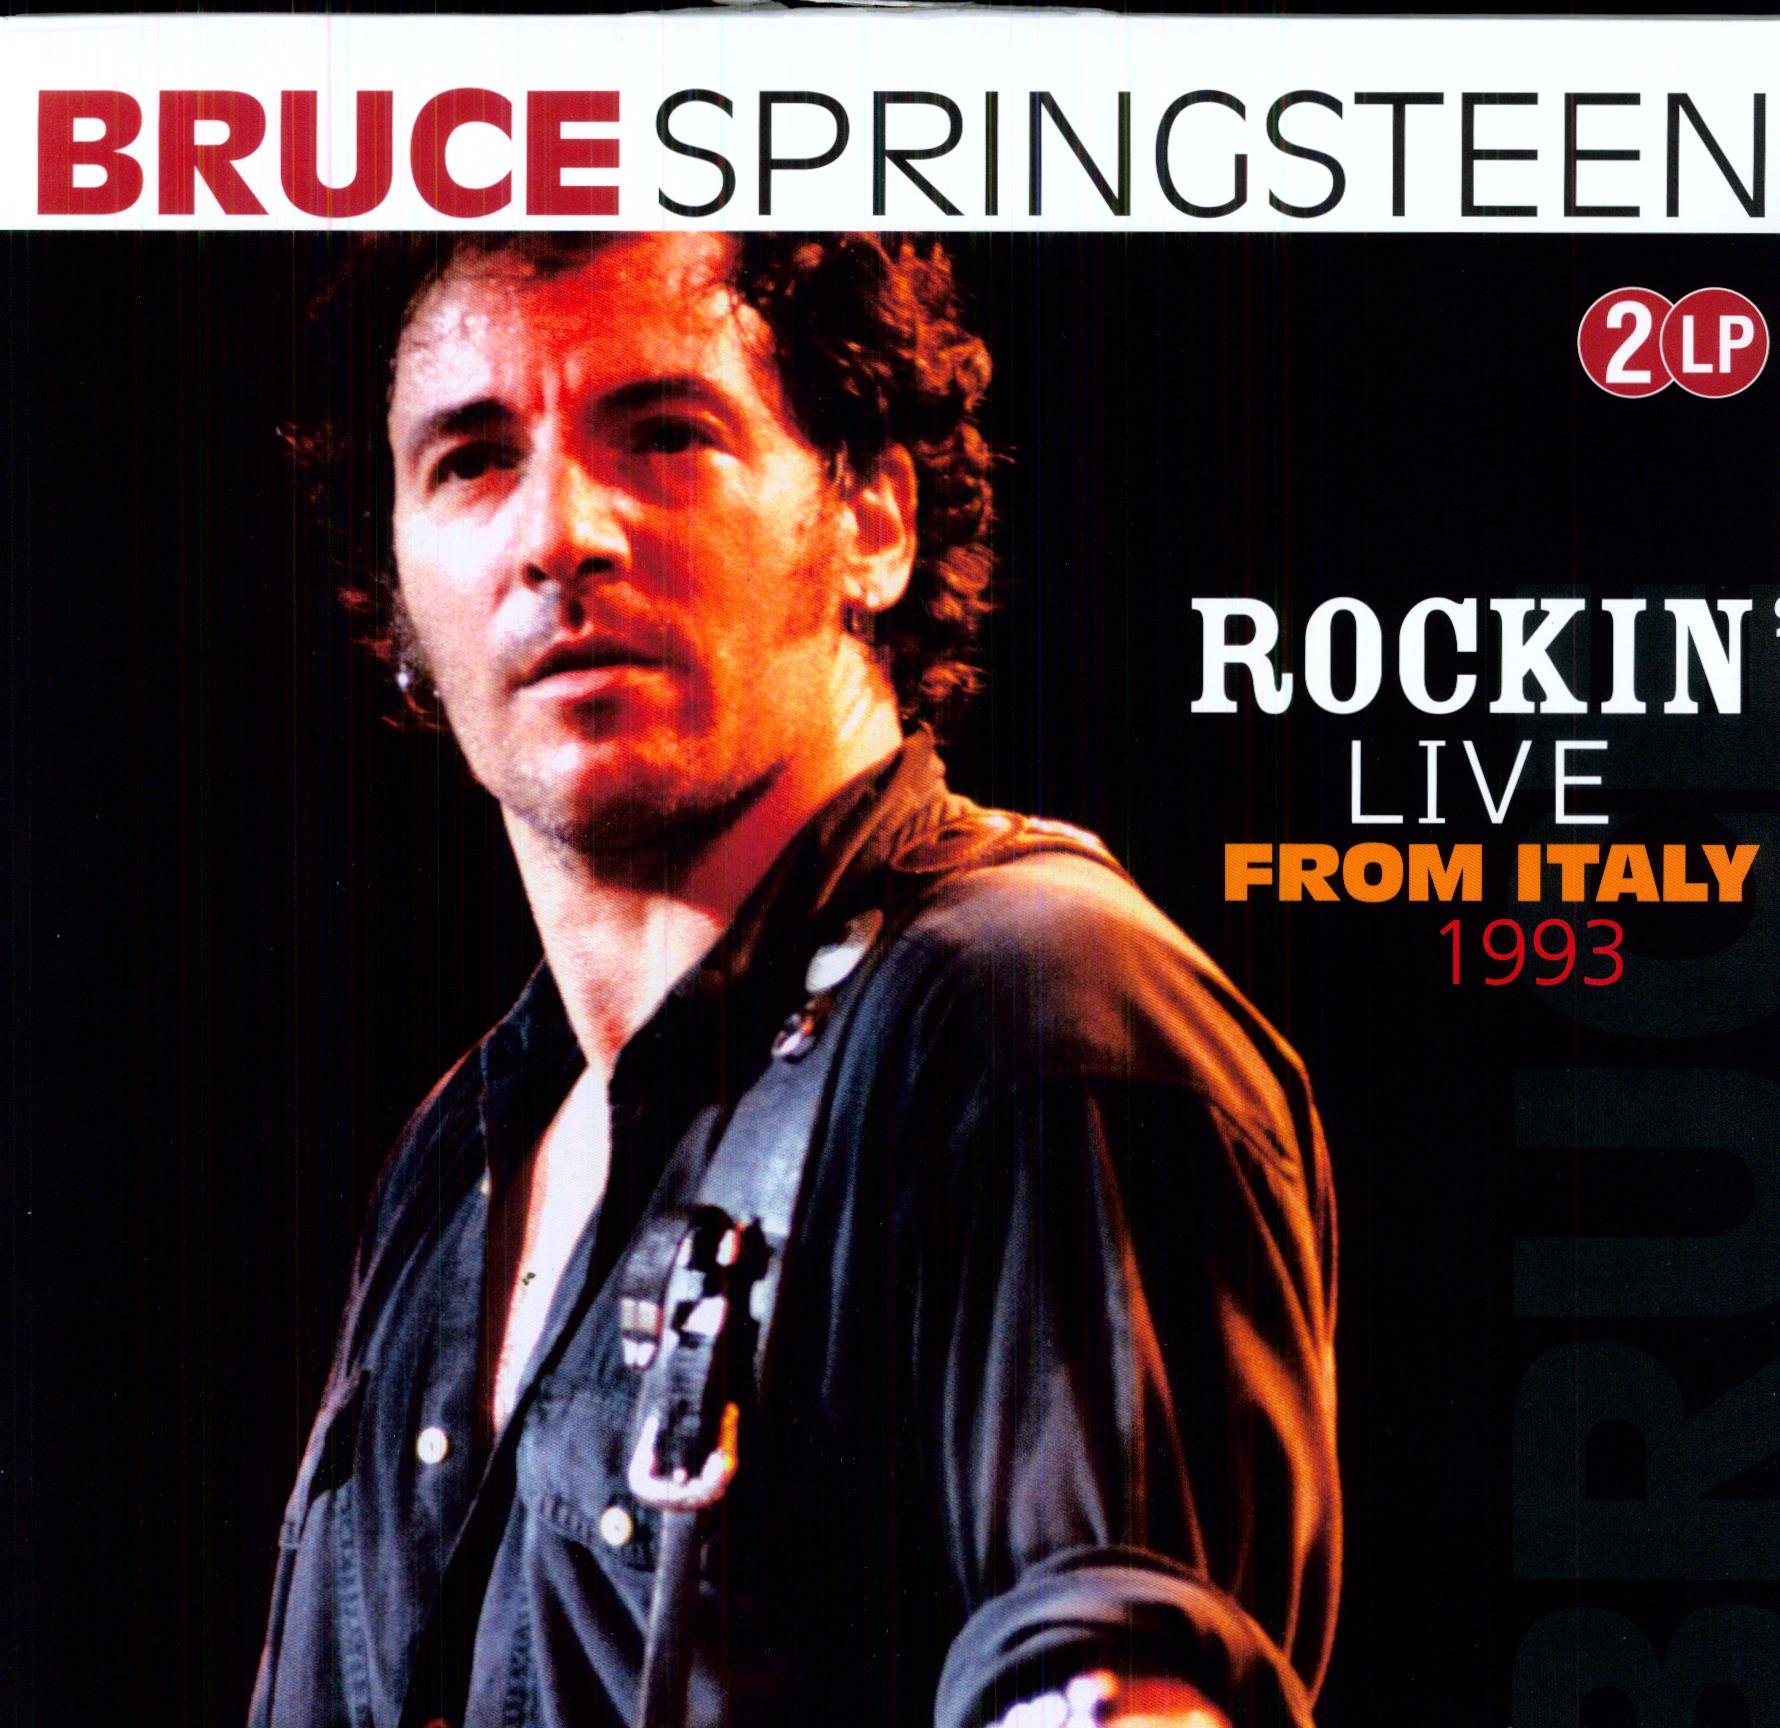 Light of day bruce springsteen mp3 torrent who wrote the theme tune to match of the day torrent